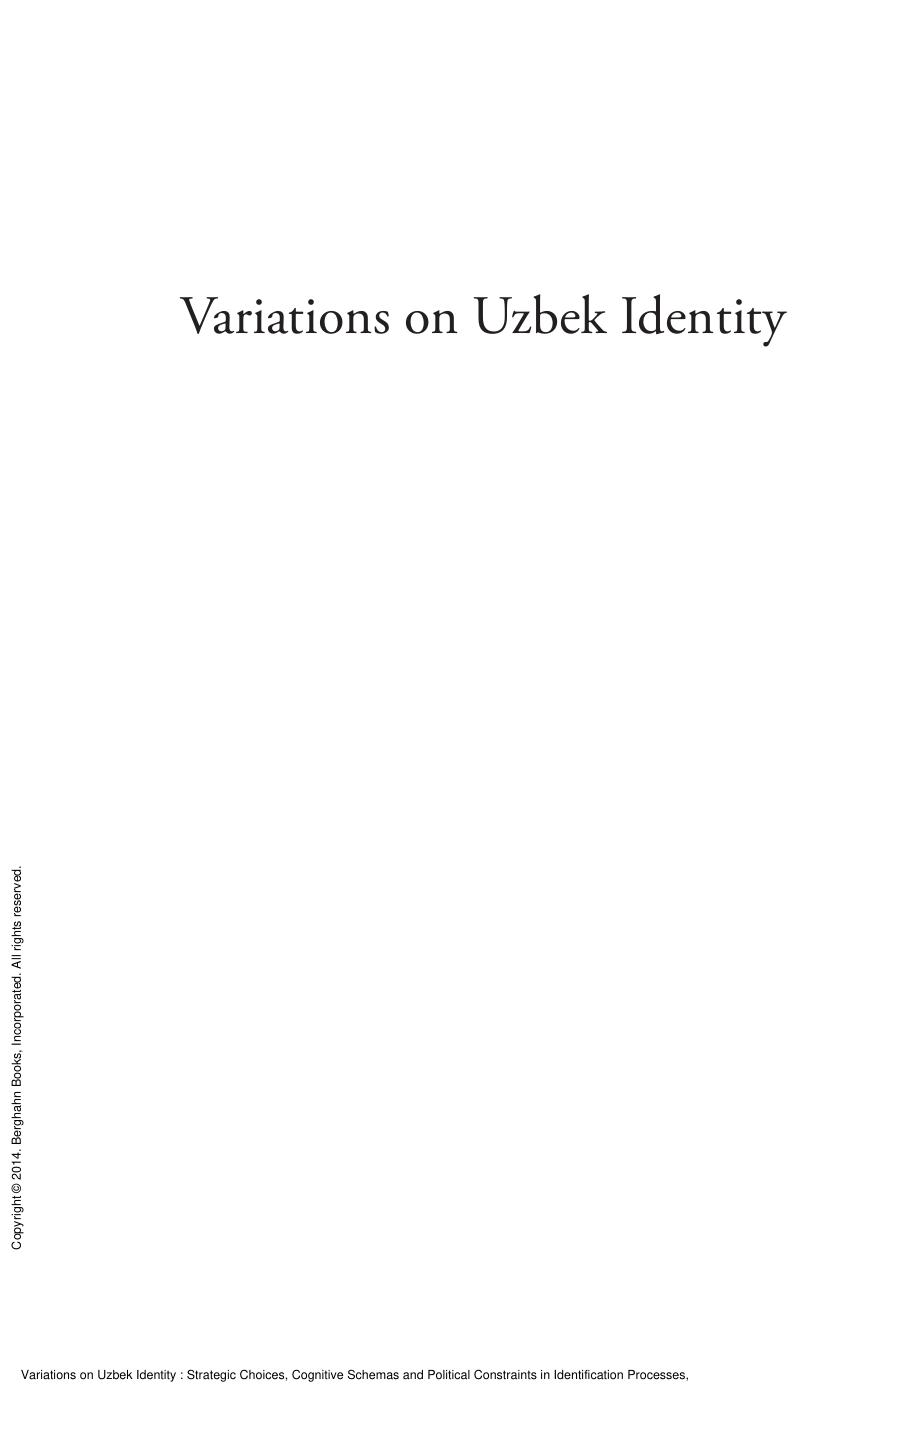 Variations on Uzbek Identity: Strategic Choices, Cognitive Schemas and Political Constraints in Identification Processes by Peter Finke